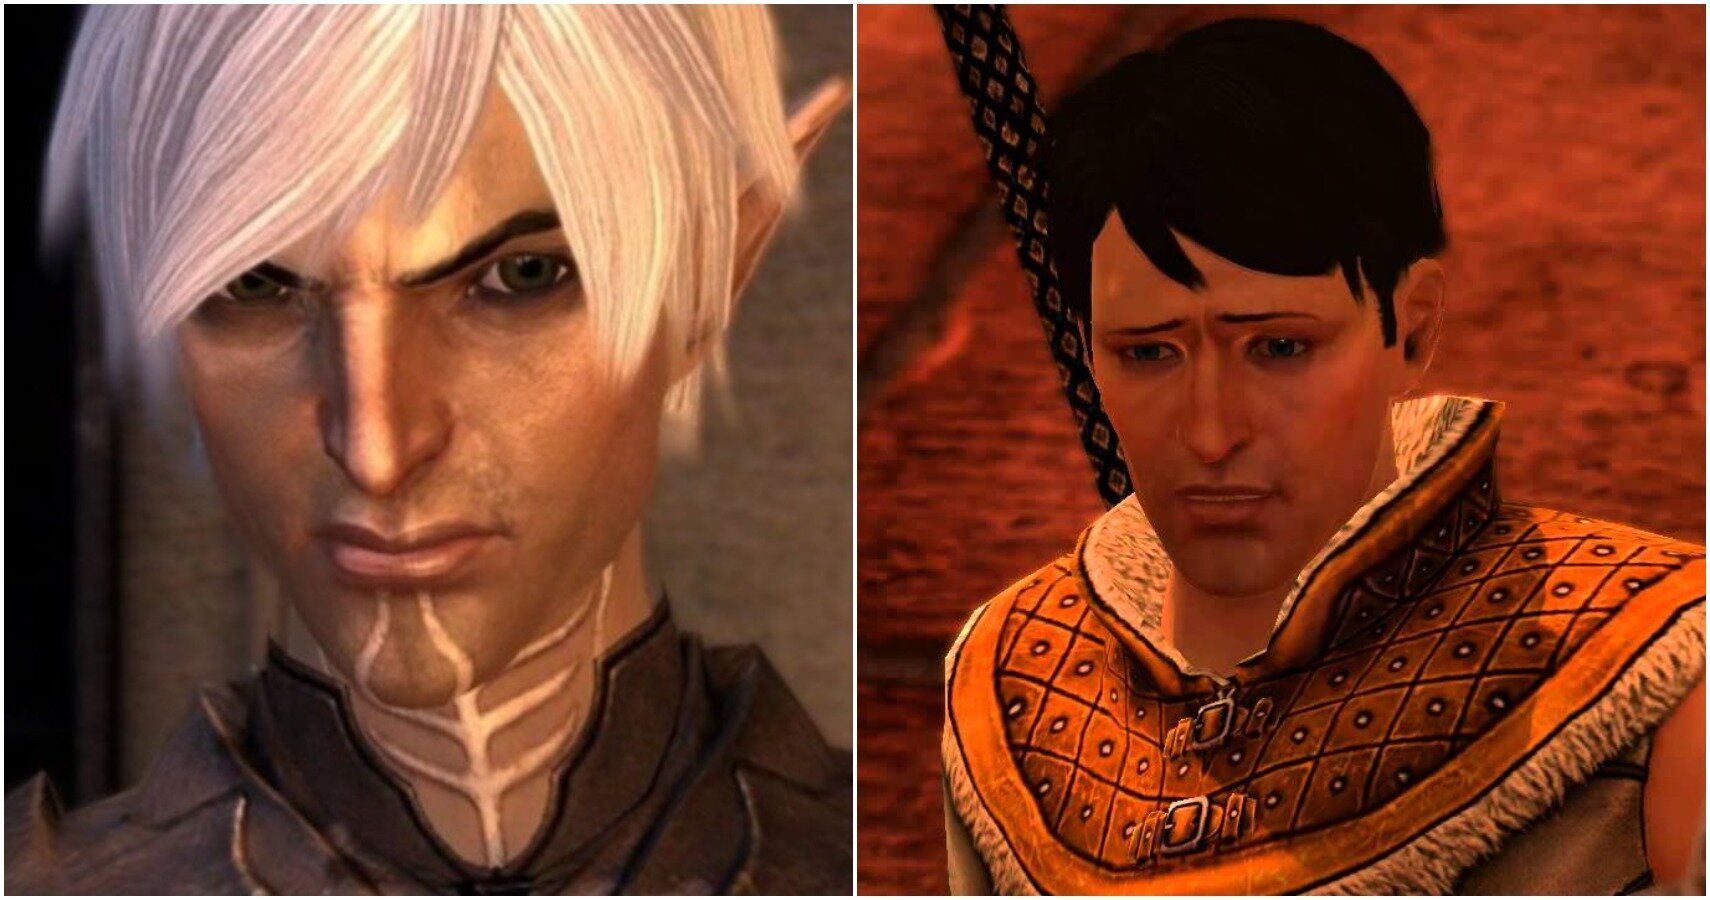 Andy 🌿 on X: DRAGON AGE COMPANIONS - WHERE ARE THEY NOW? 🌿 A